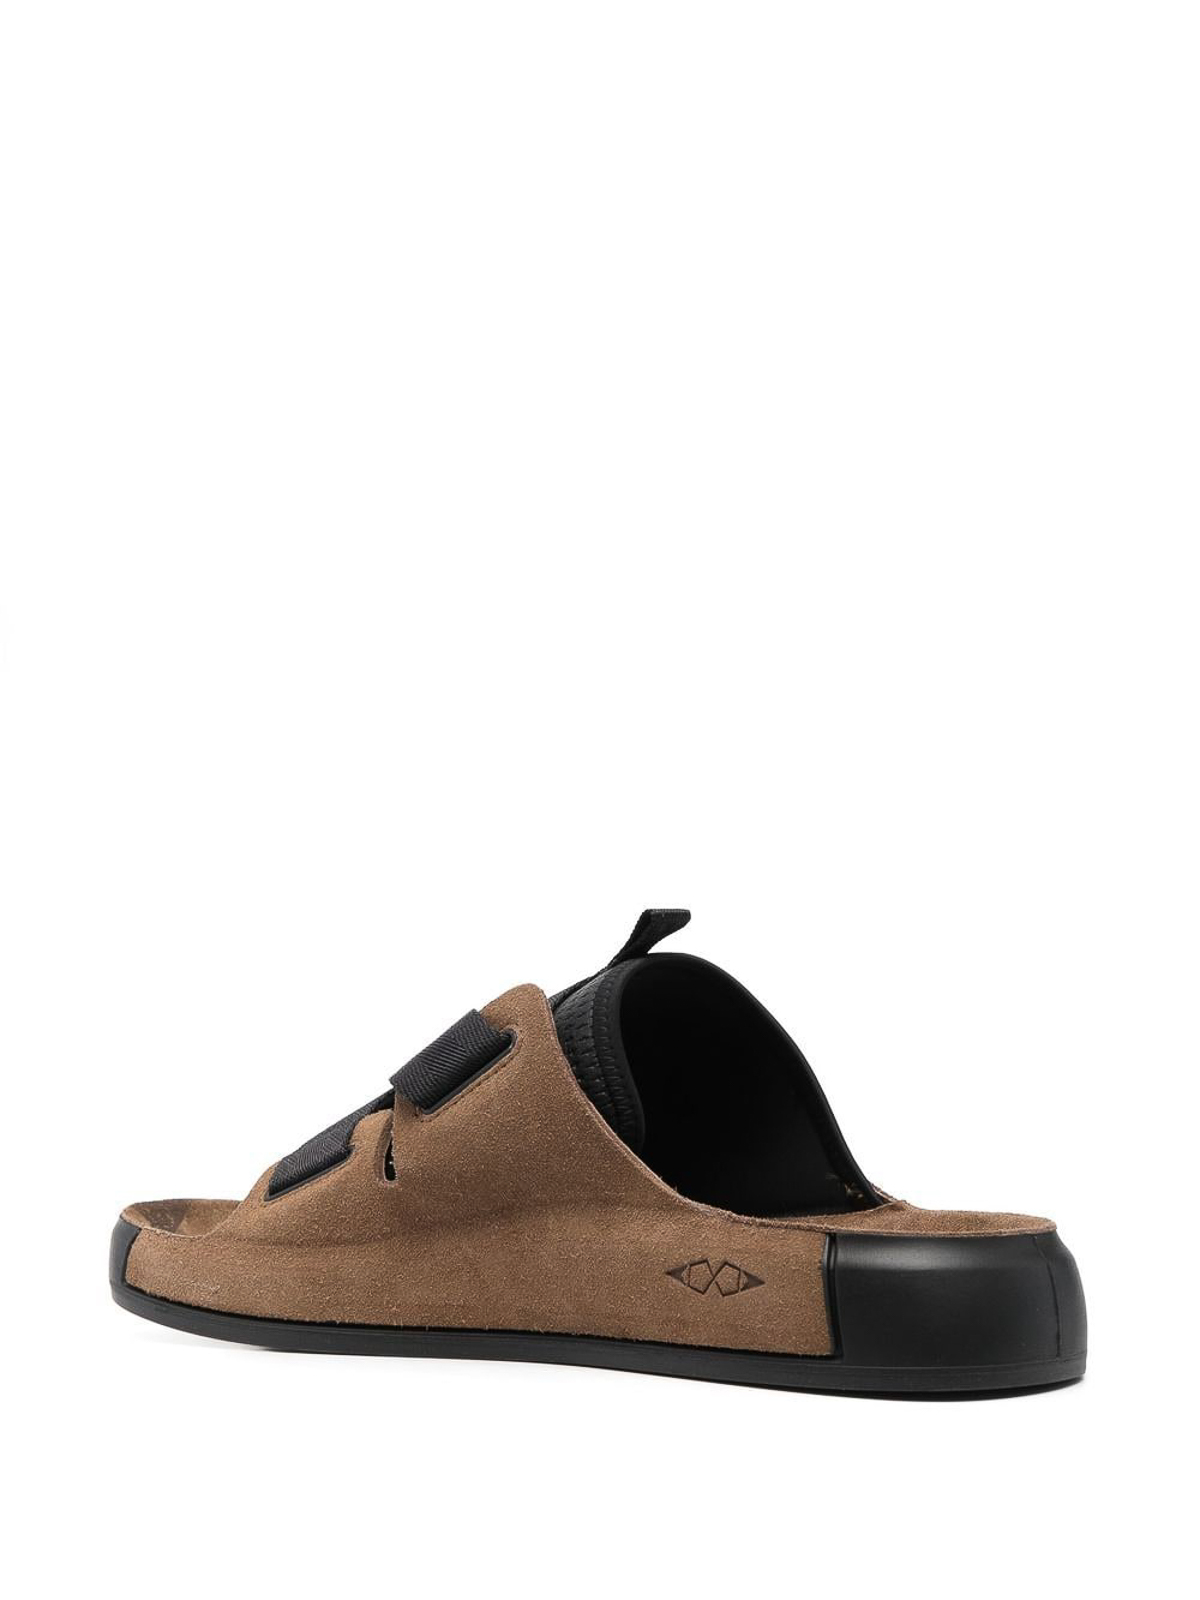 Shop Stone Island Shadow Project Sandals Brown